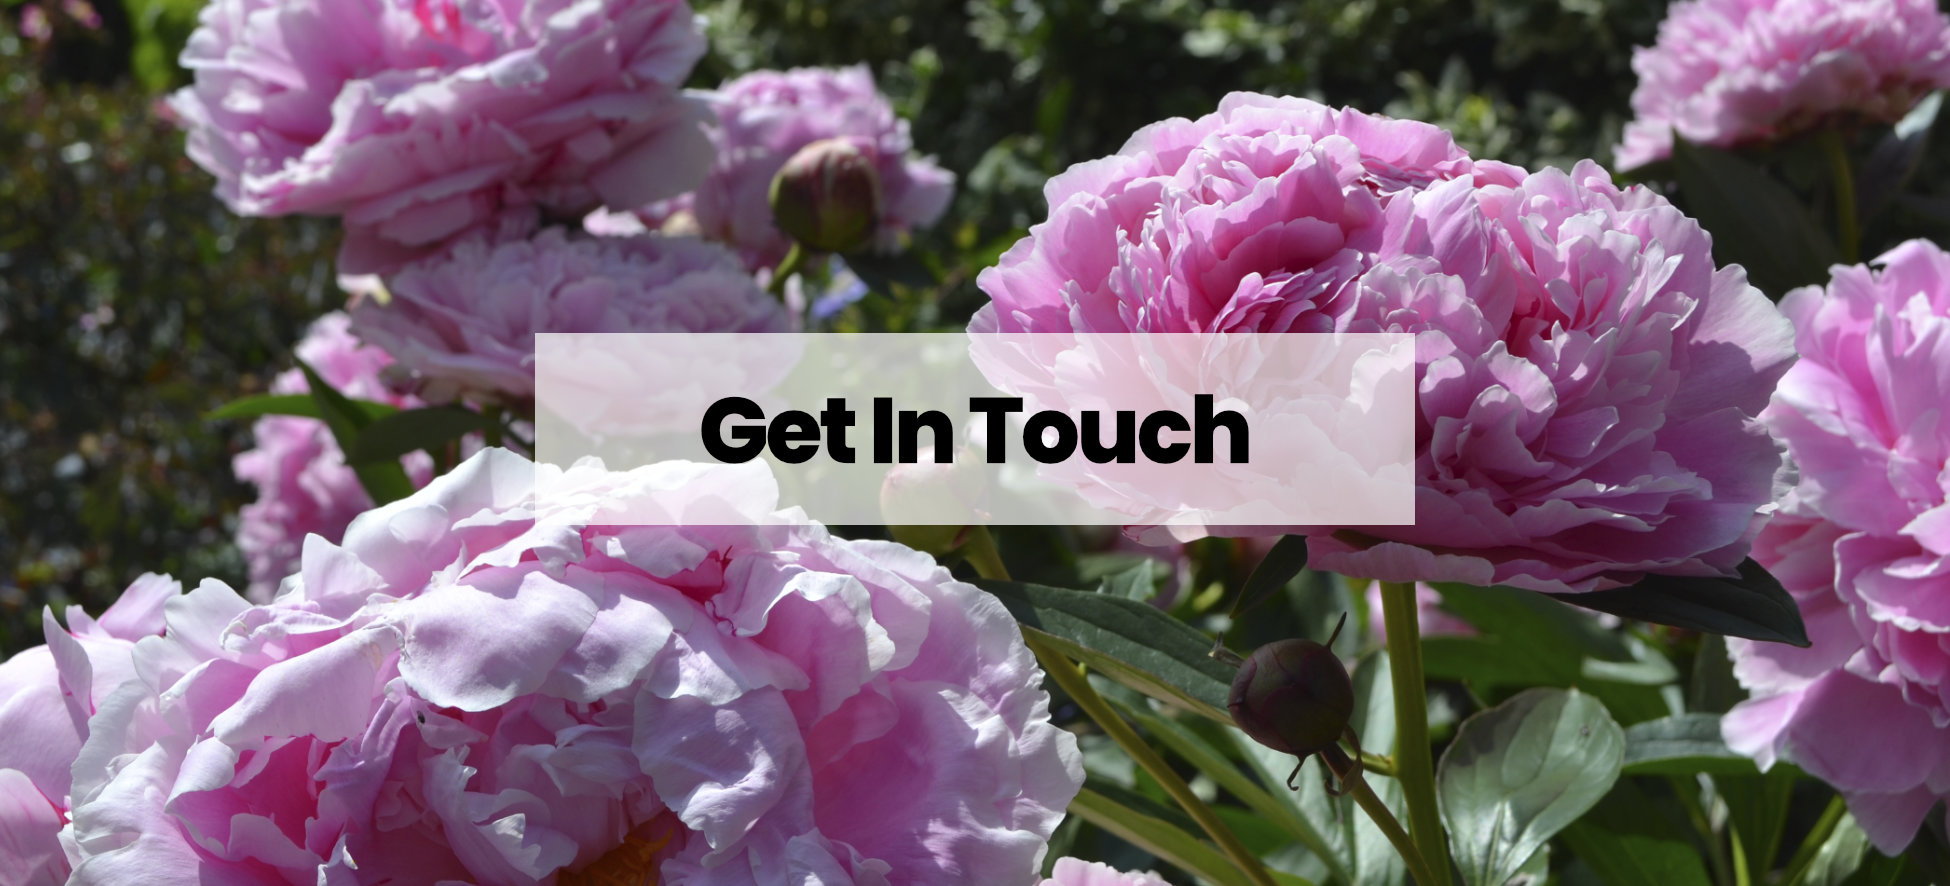 Get In Touch Pink Peonies Header